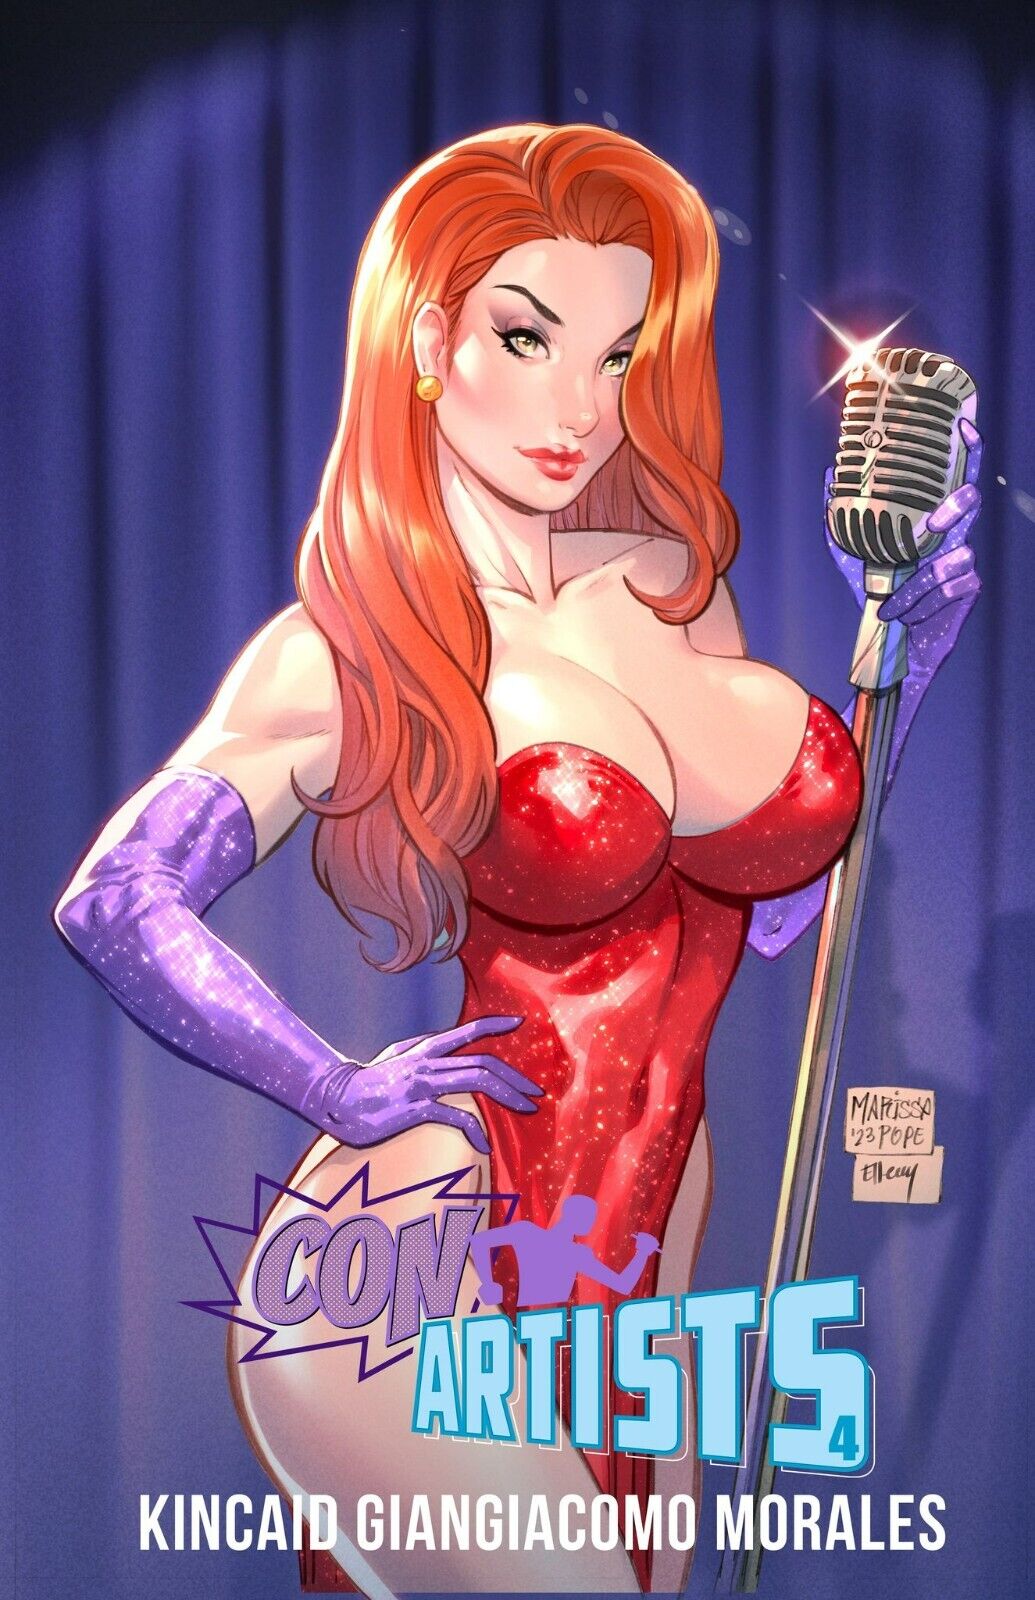 Con Artists 4 Jessica Rabbit Cosplay Marissa Pope Variant Covers  NM, NOT CGC